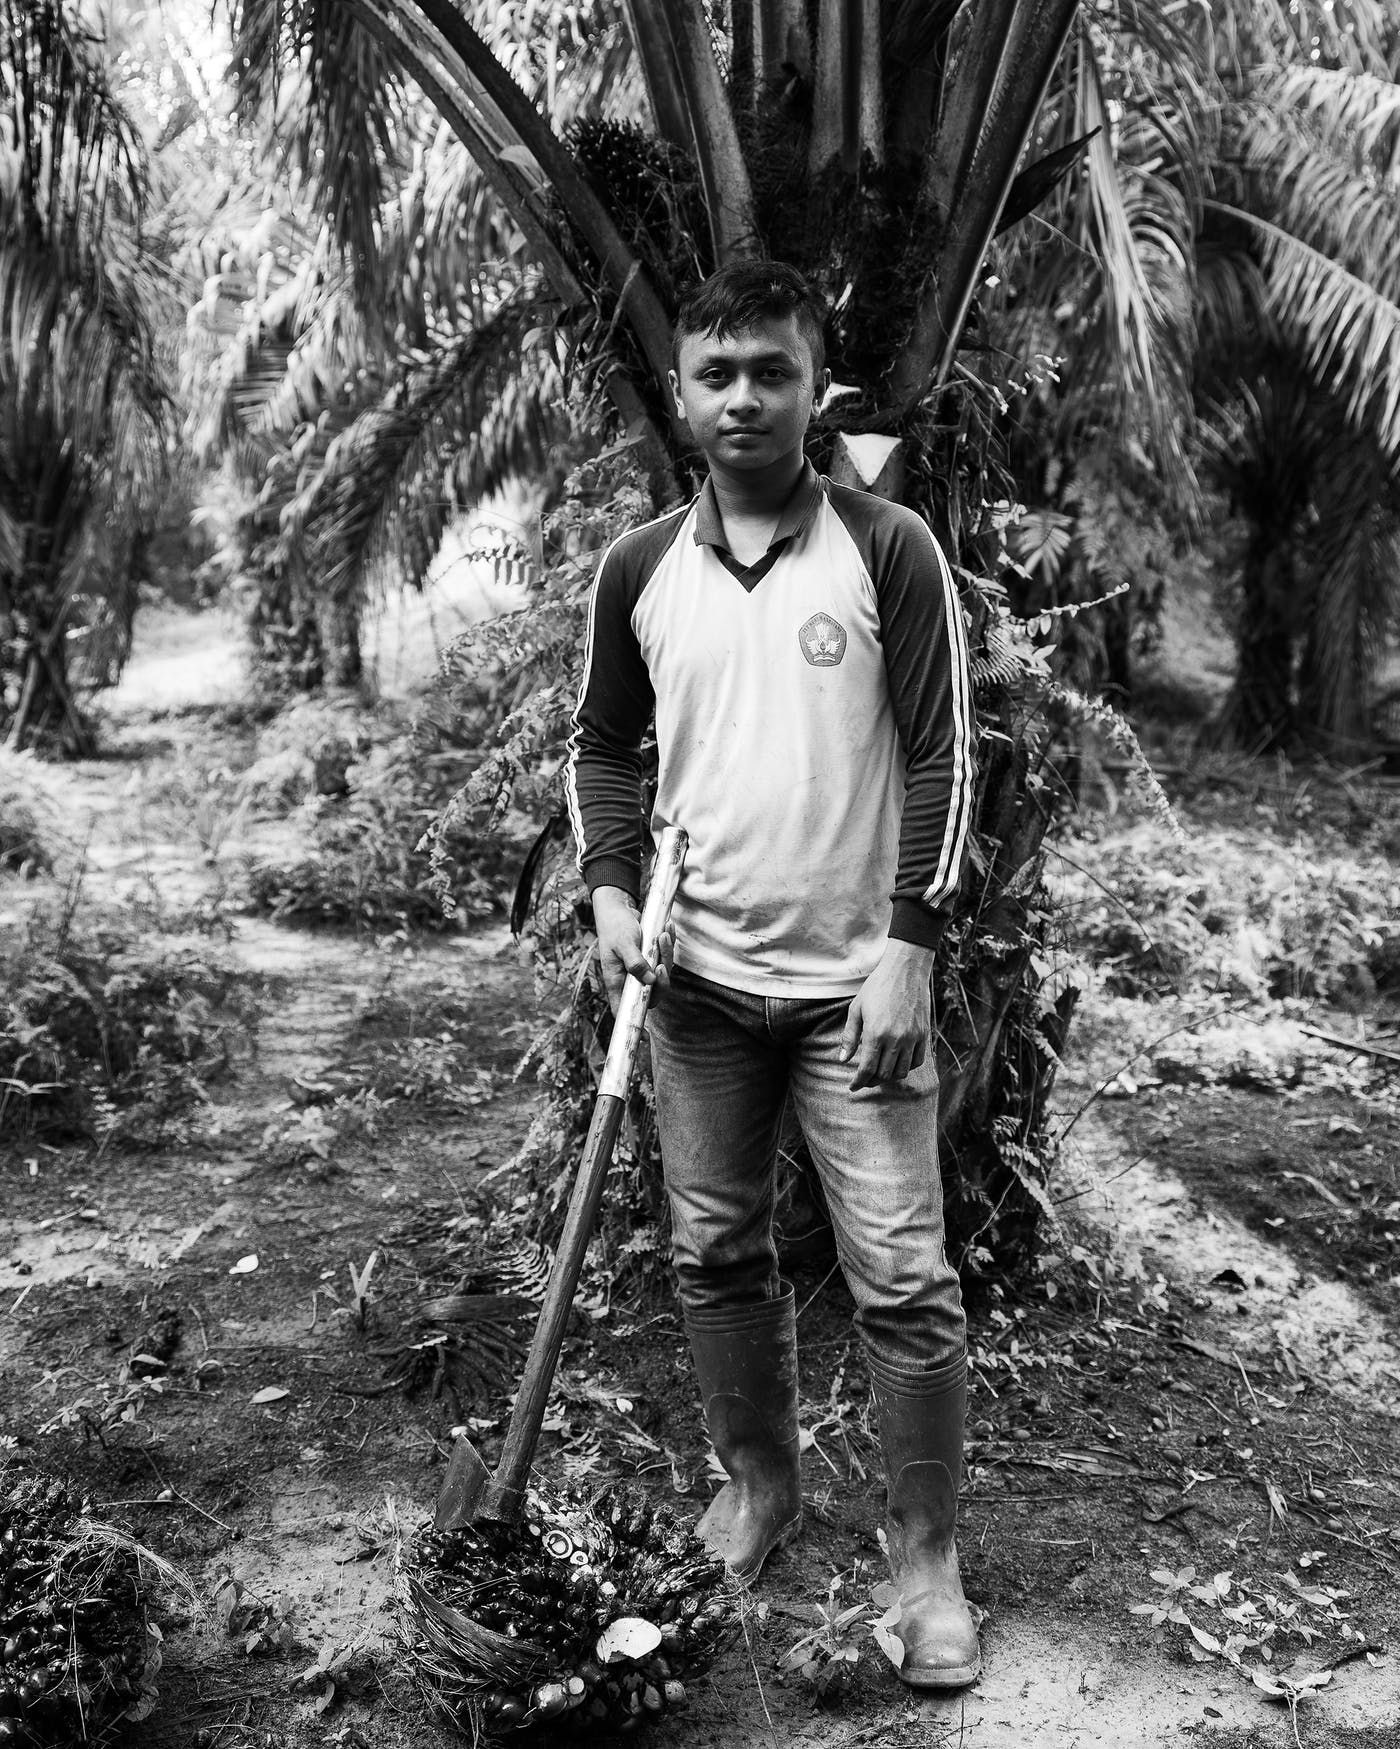 Puryito, 25, has worked on the plantation alongside his family since he was a teenager. Image by Xyza Cruz Bacani. Indonesia, 2018.